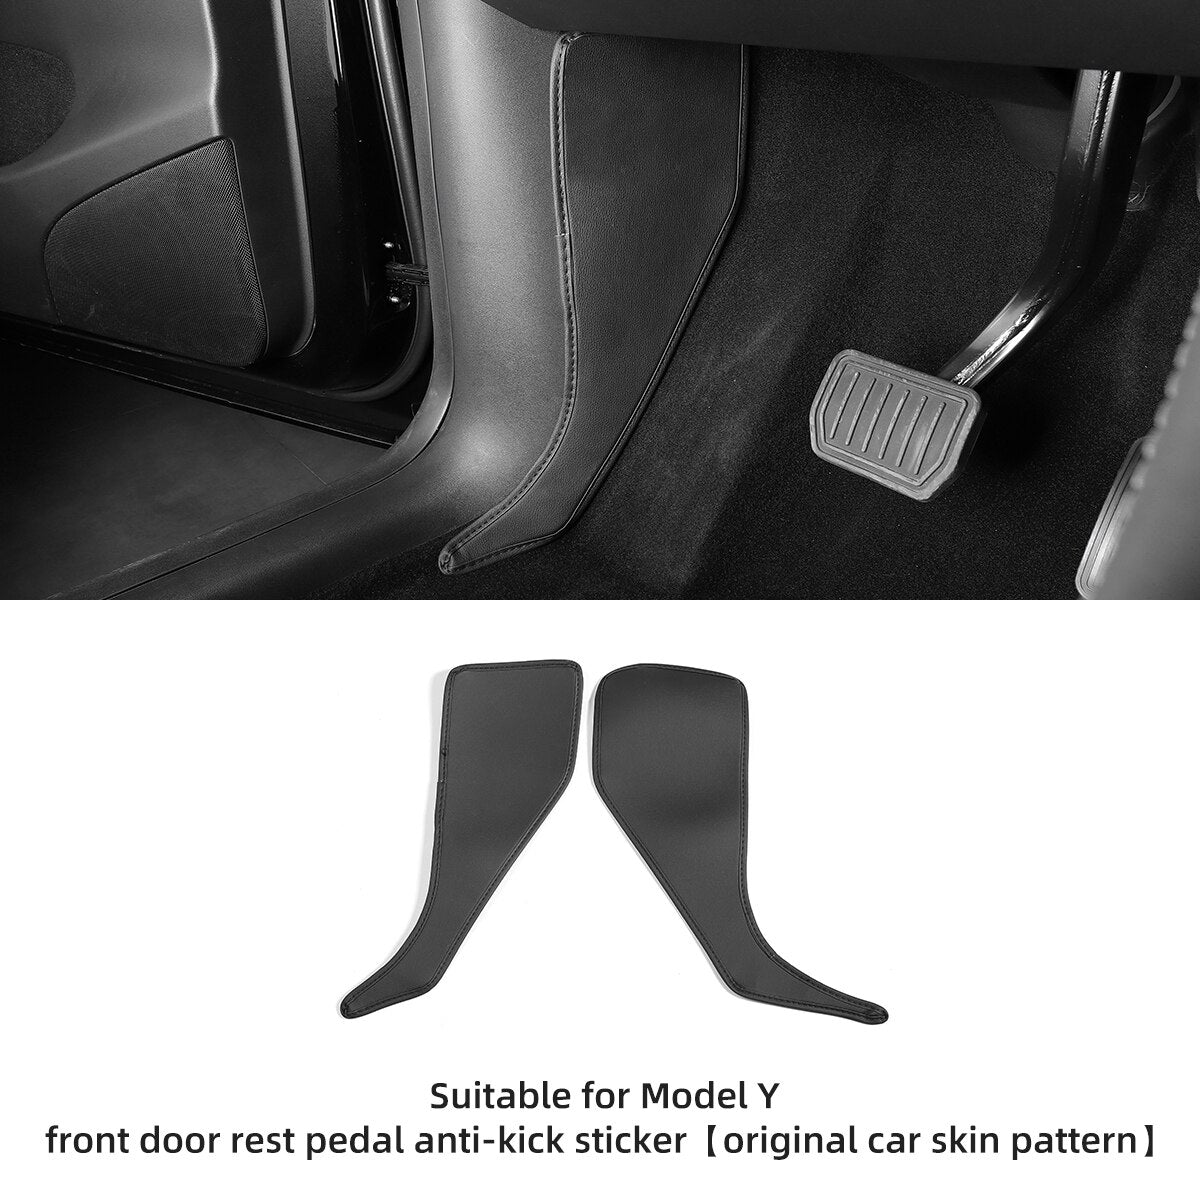 Car Central Control Side Defense Kick Pad For Tesla Model3 ModelY Protective Pad TPE Trunk Side Scuff Plate Pad Car Accessories